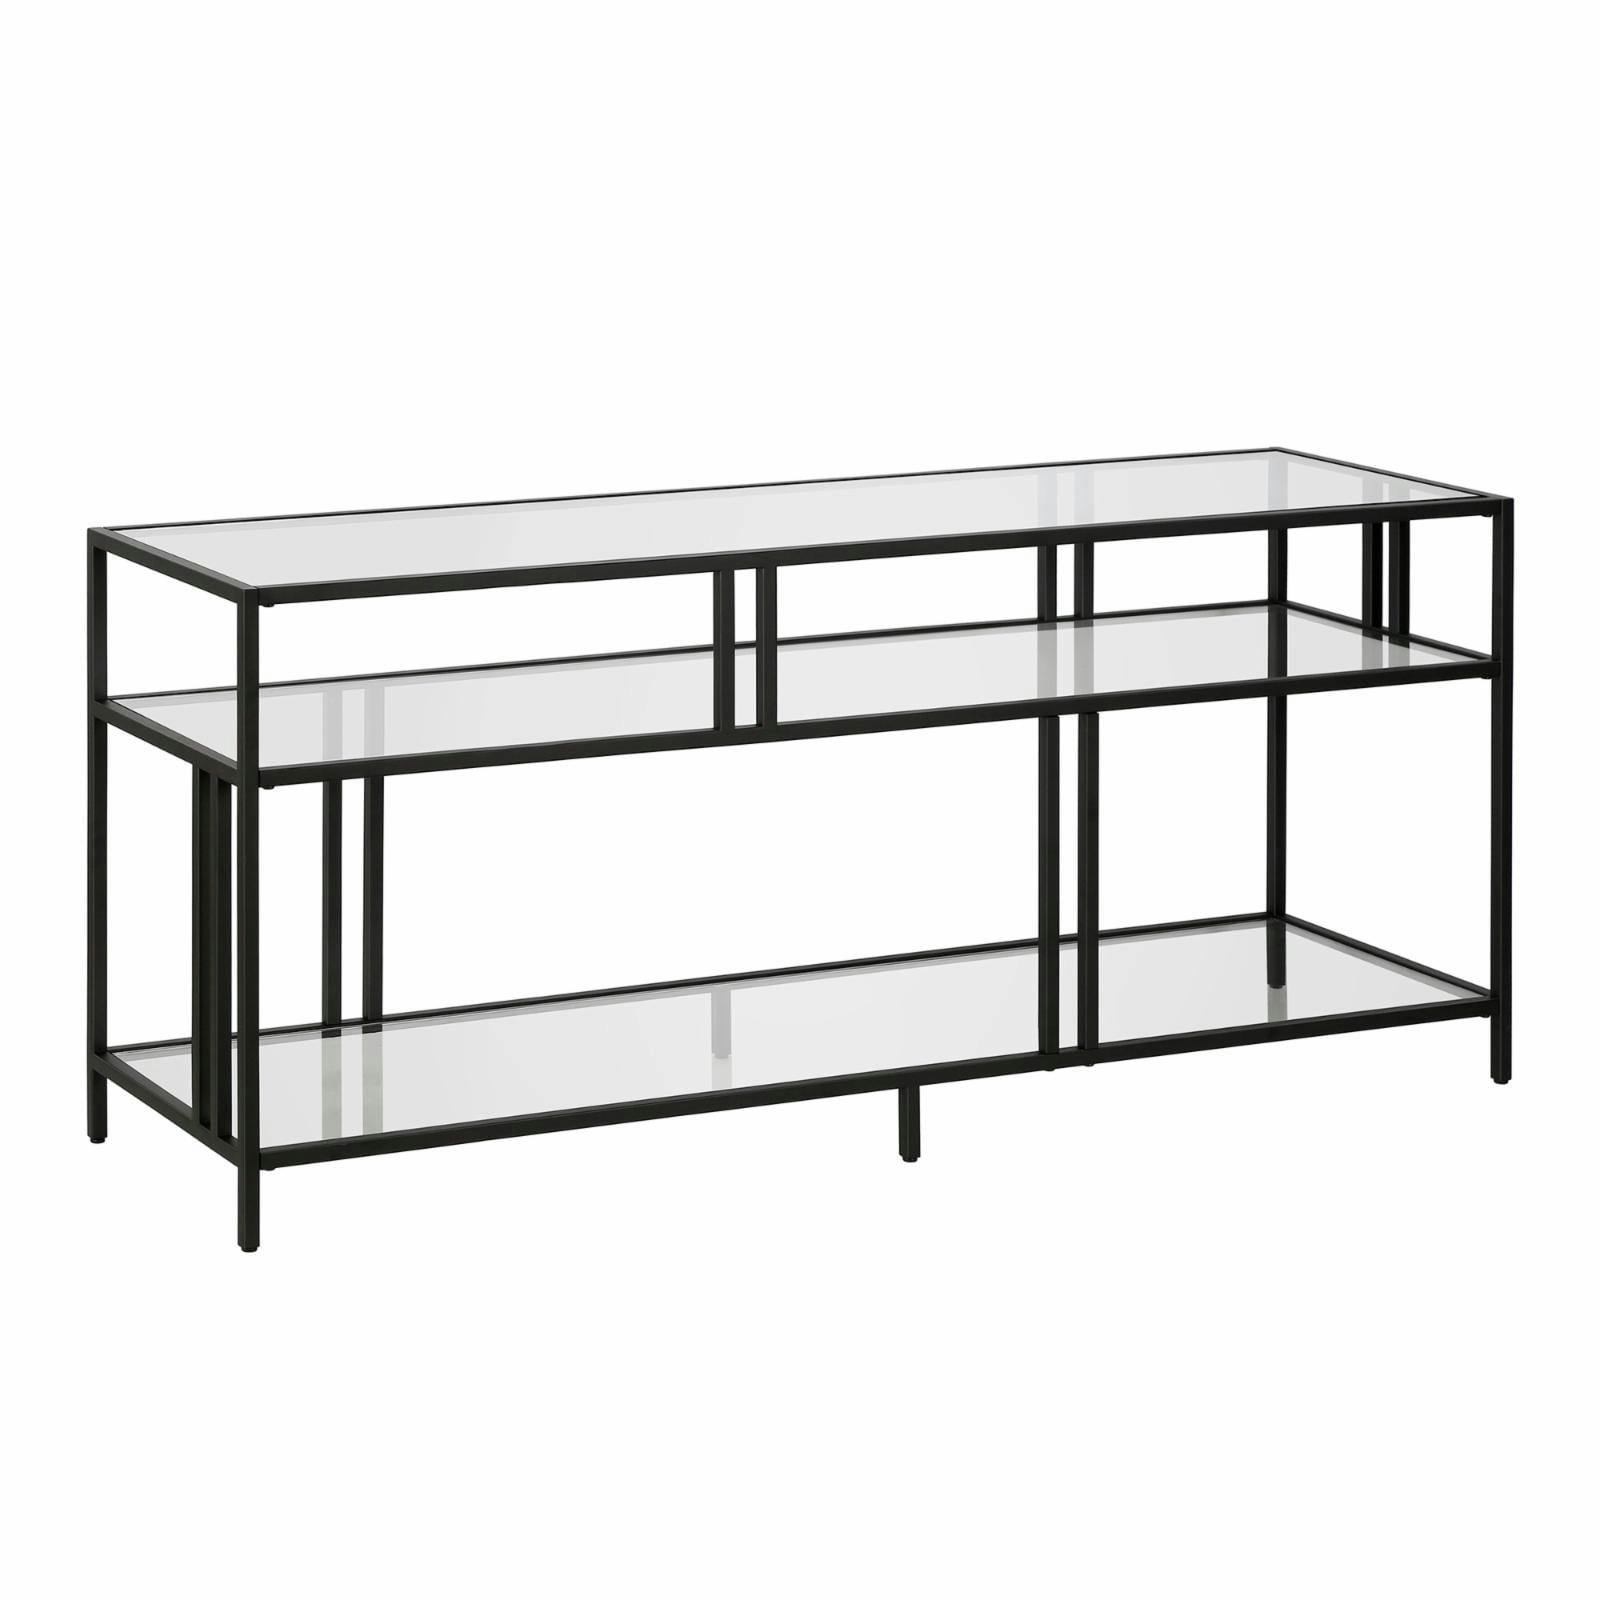 Cortland Industrial Blackened Bronze 55" TV Stand with Glass Shelves